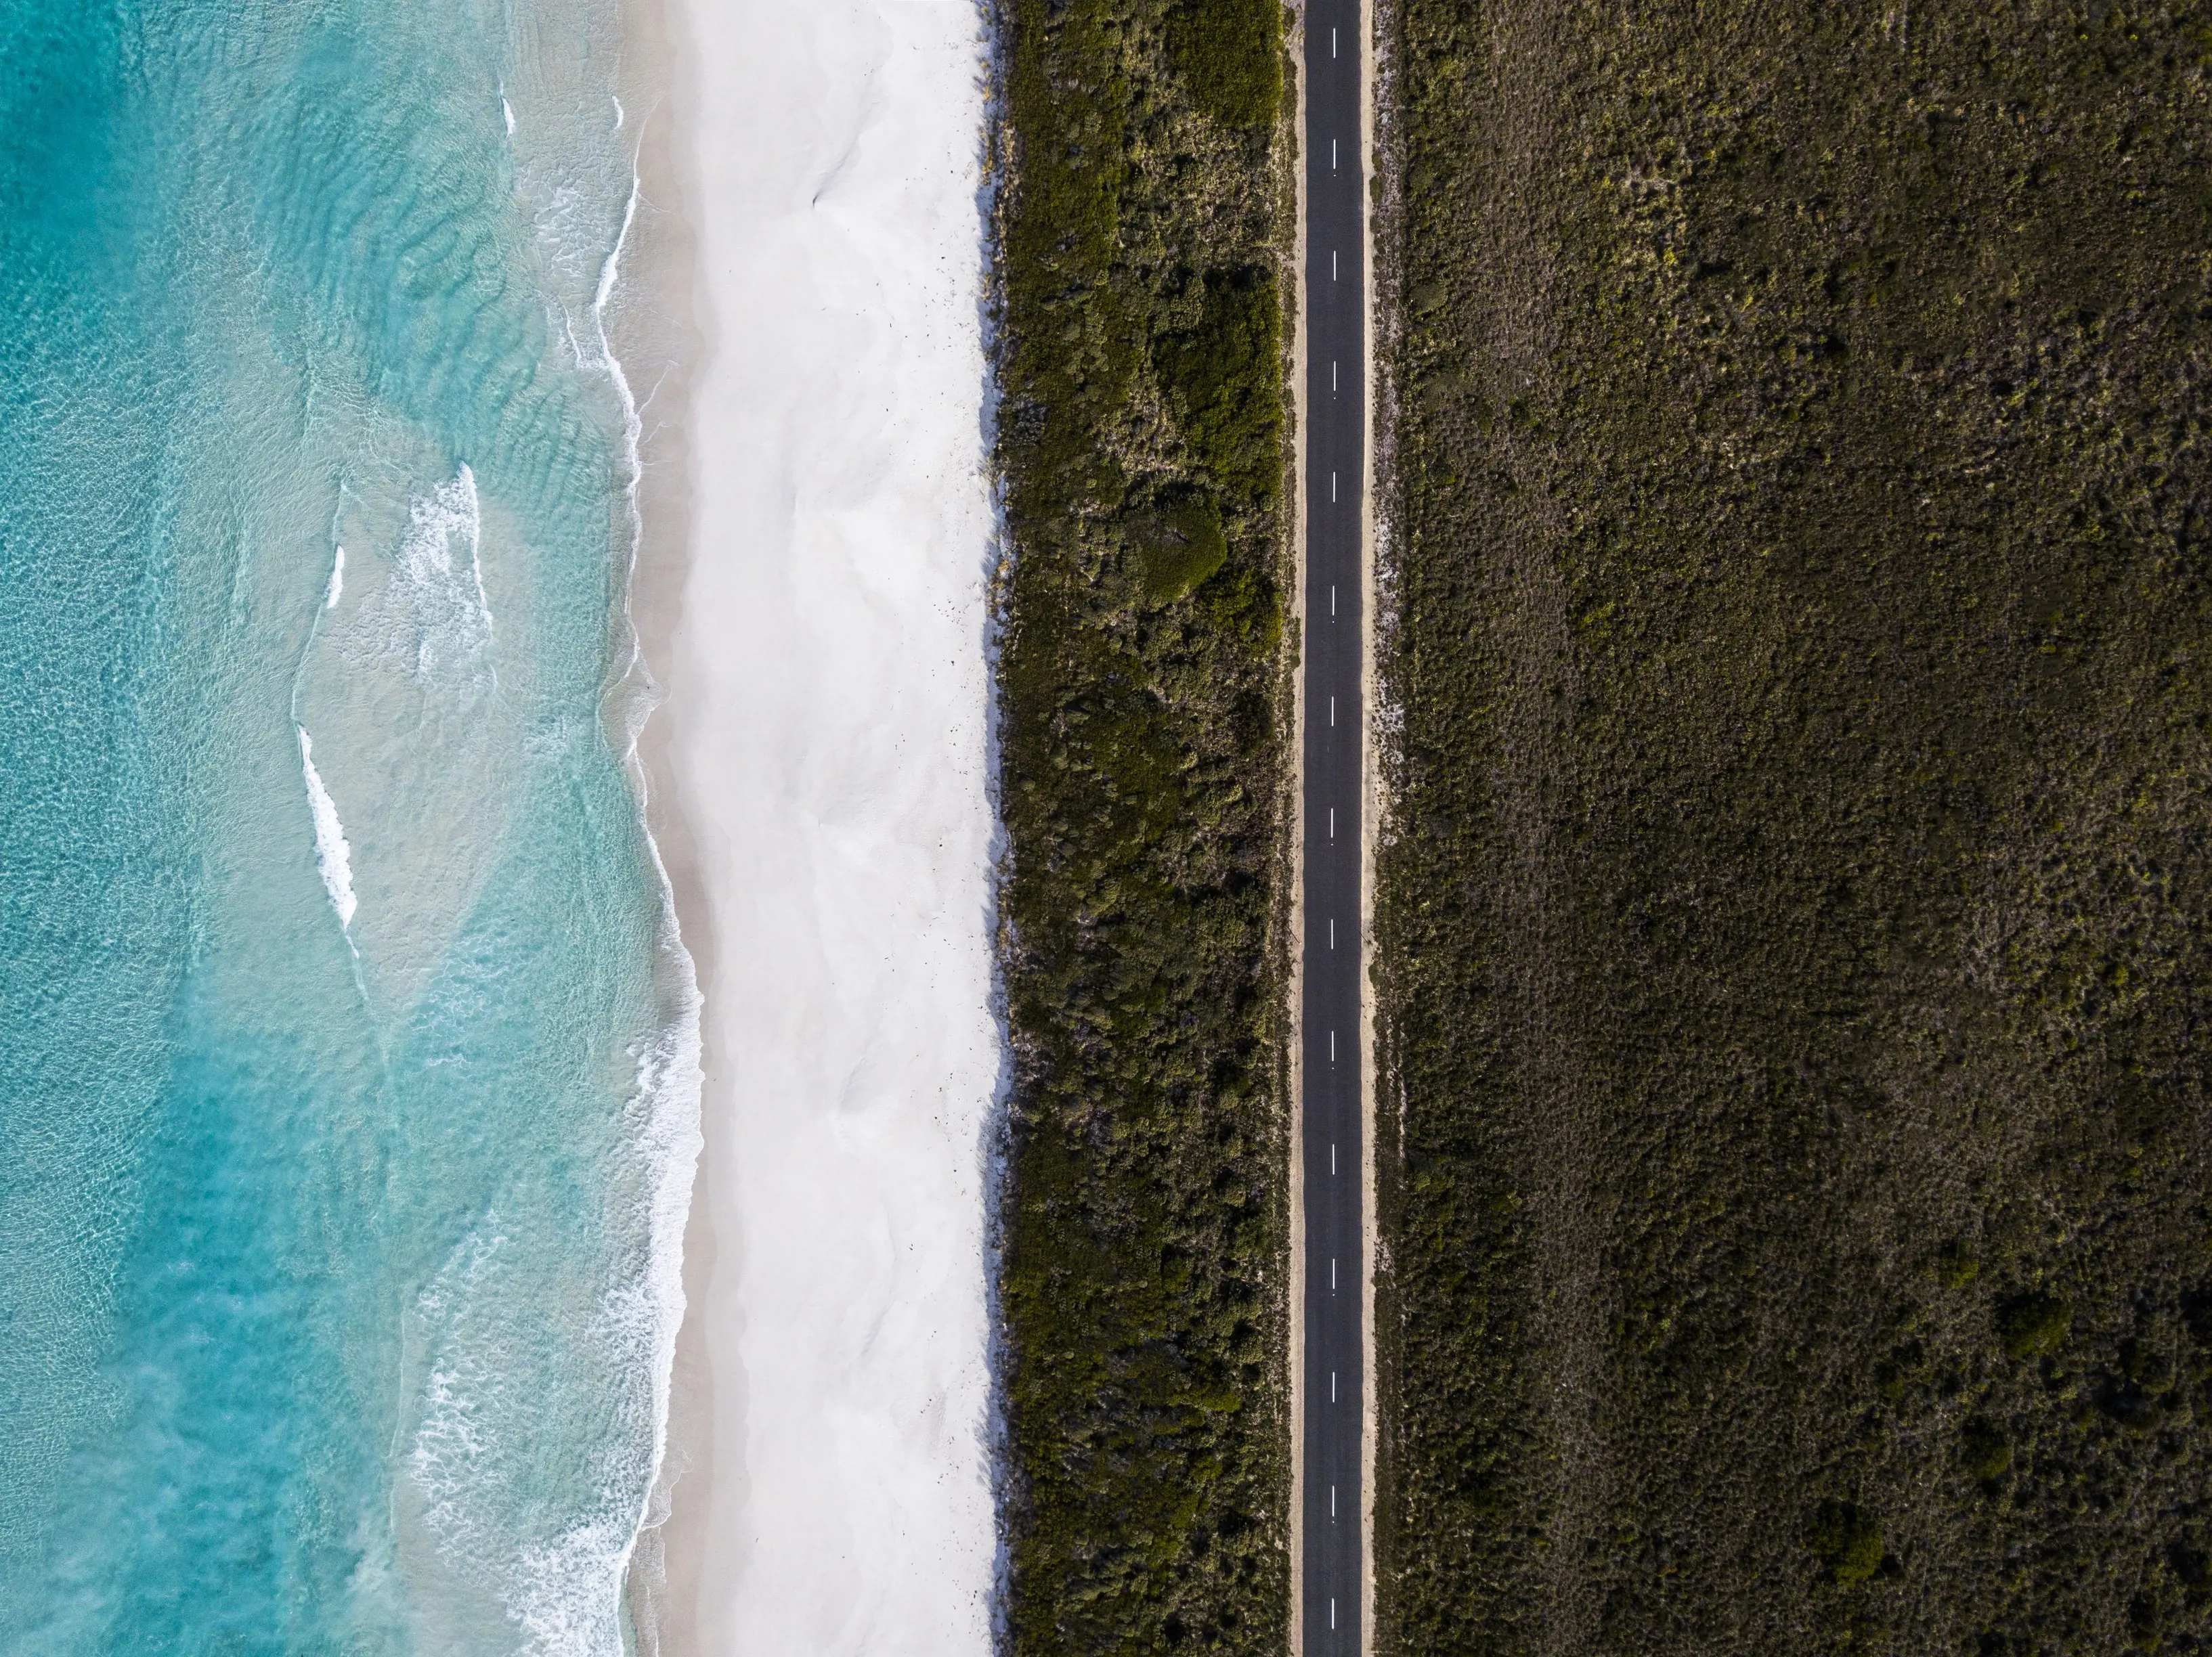 An incredible aerial view of the Road to Bicheno, with the stunning shoreline and ocean on one side and lush bushland on the opposite.